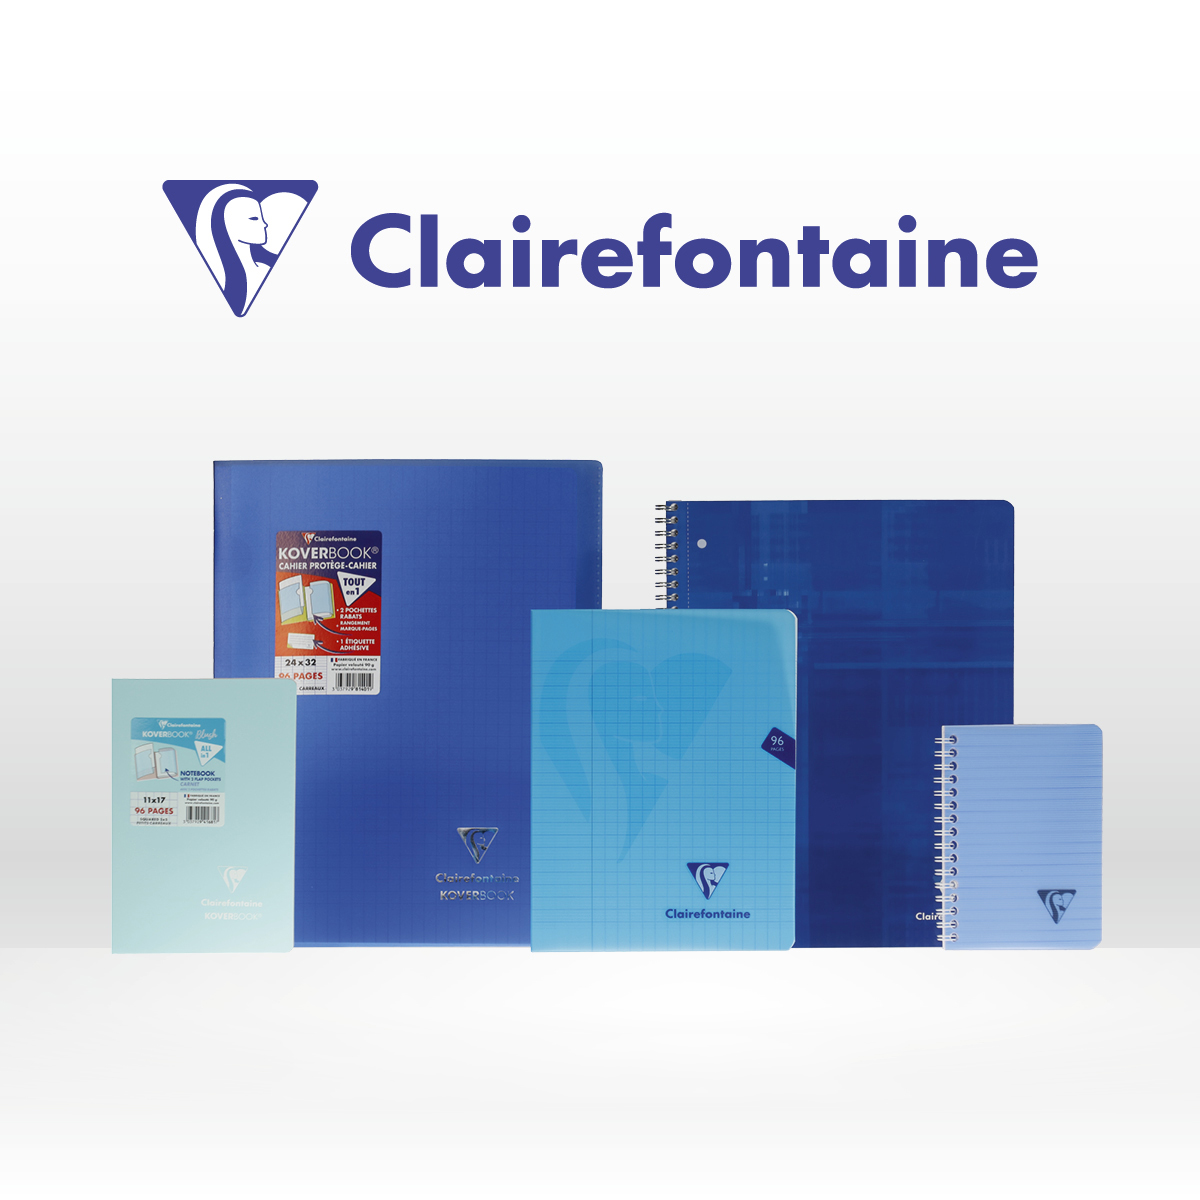 Clairefontaine 96440C Calligraphy Paper Pad Glued at Top Satinised 30 x 40 cm 25 Sheets 130g Packaging Off-White 